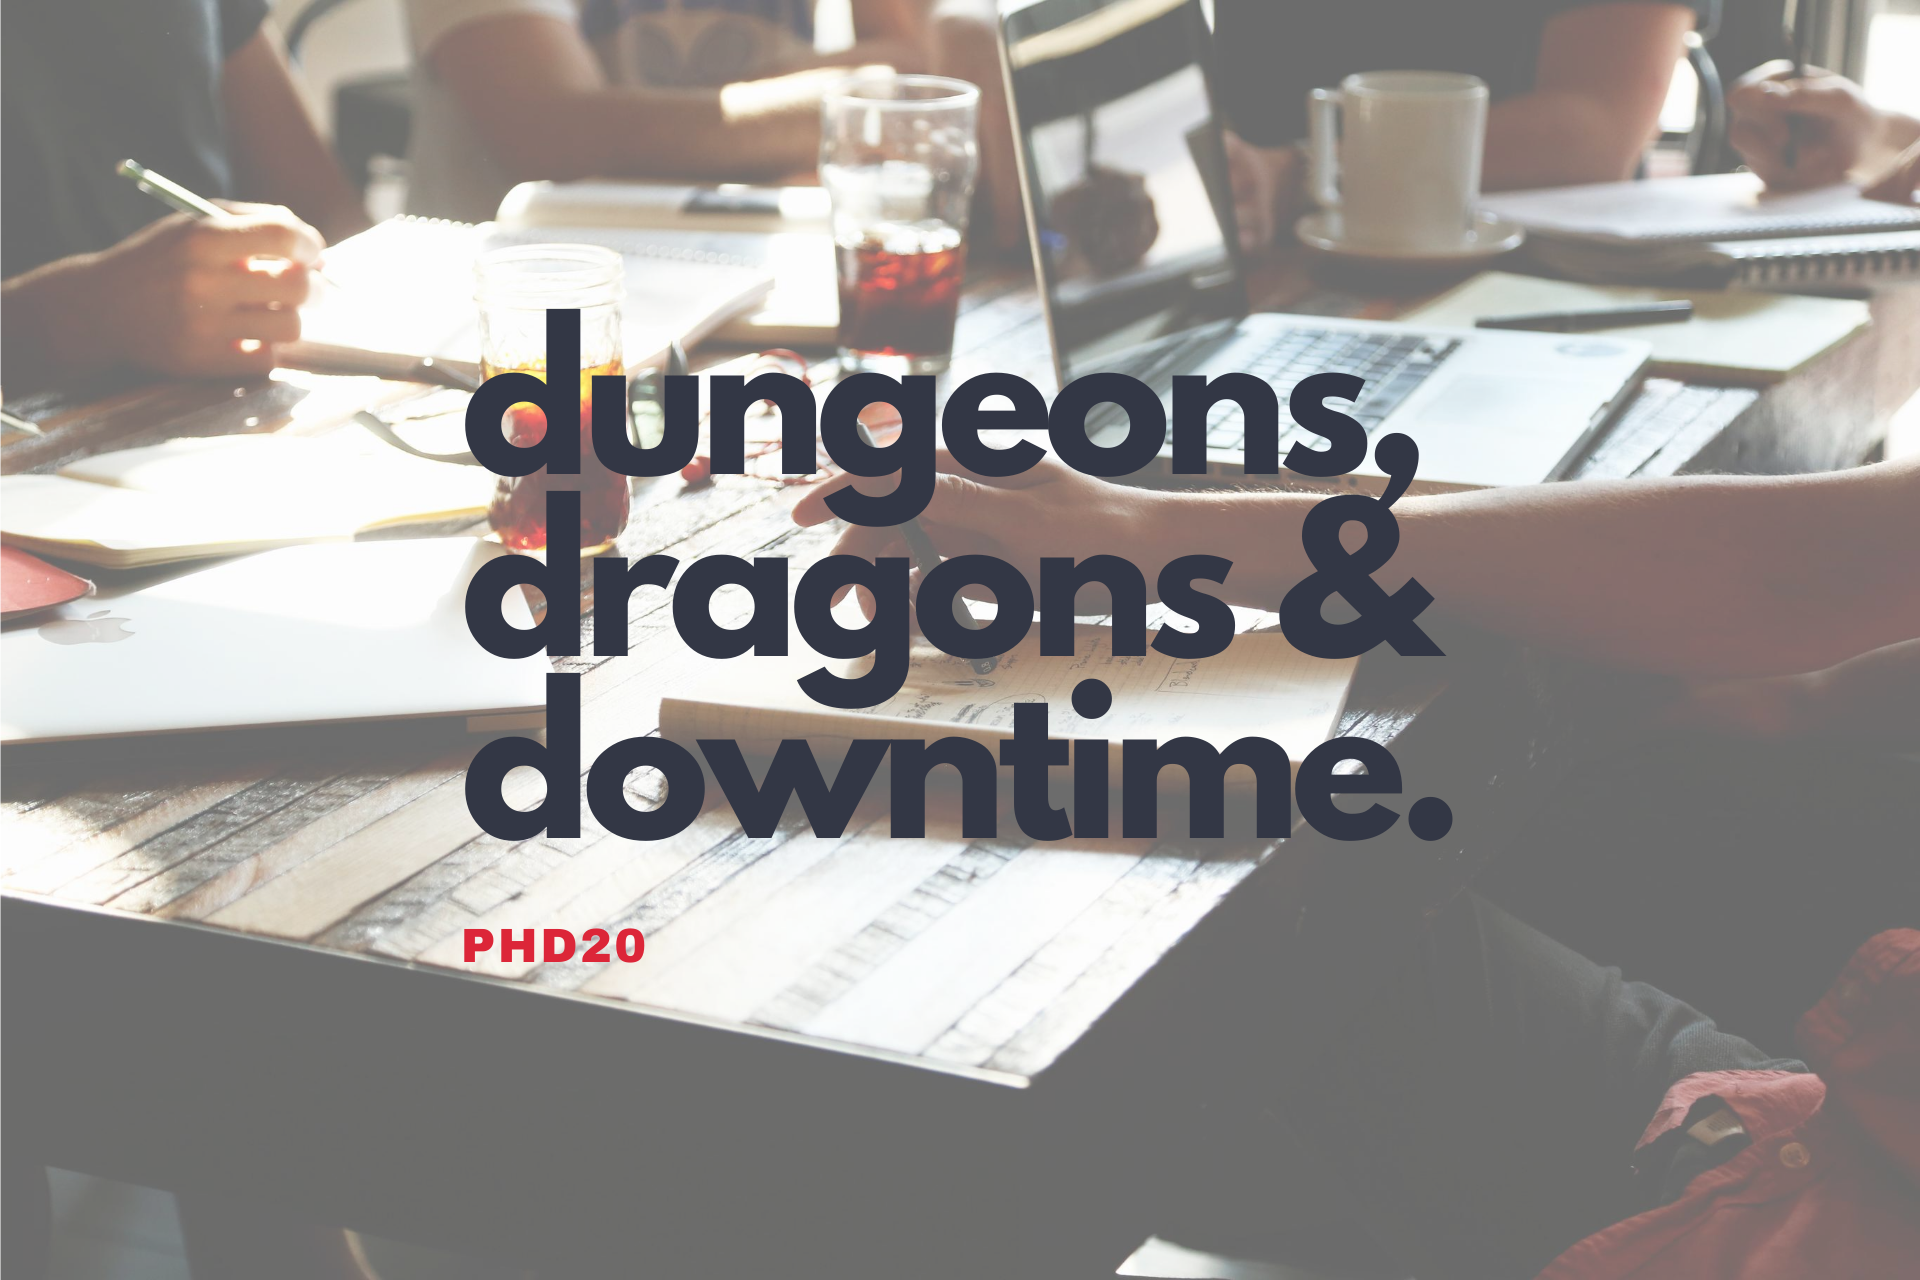 dungeons, dragons, downtime